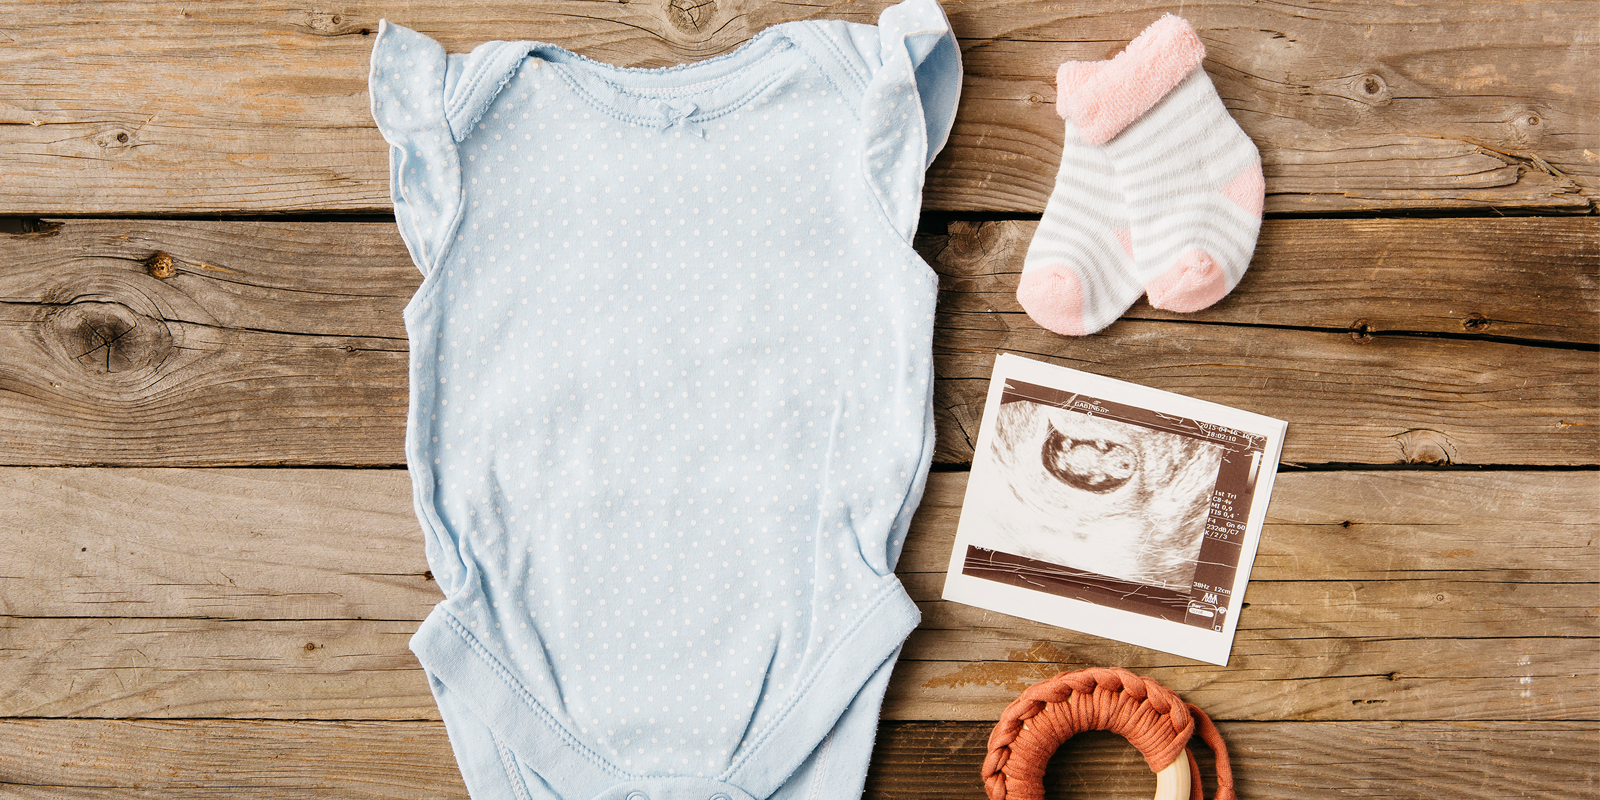 Tips For Choosing Baby Clothing